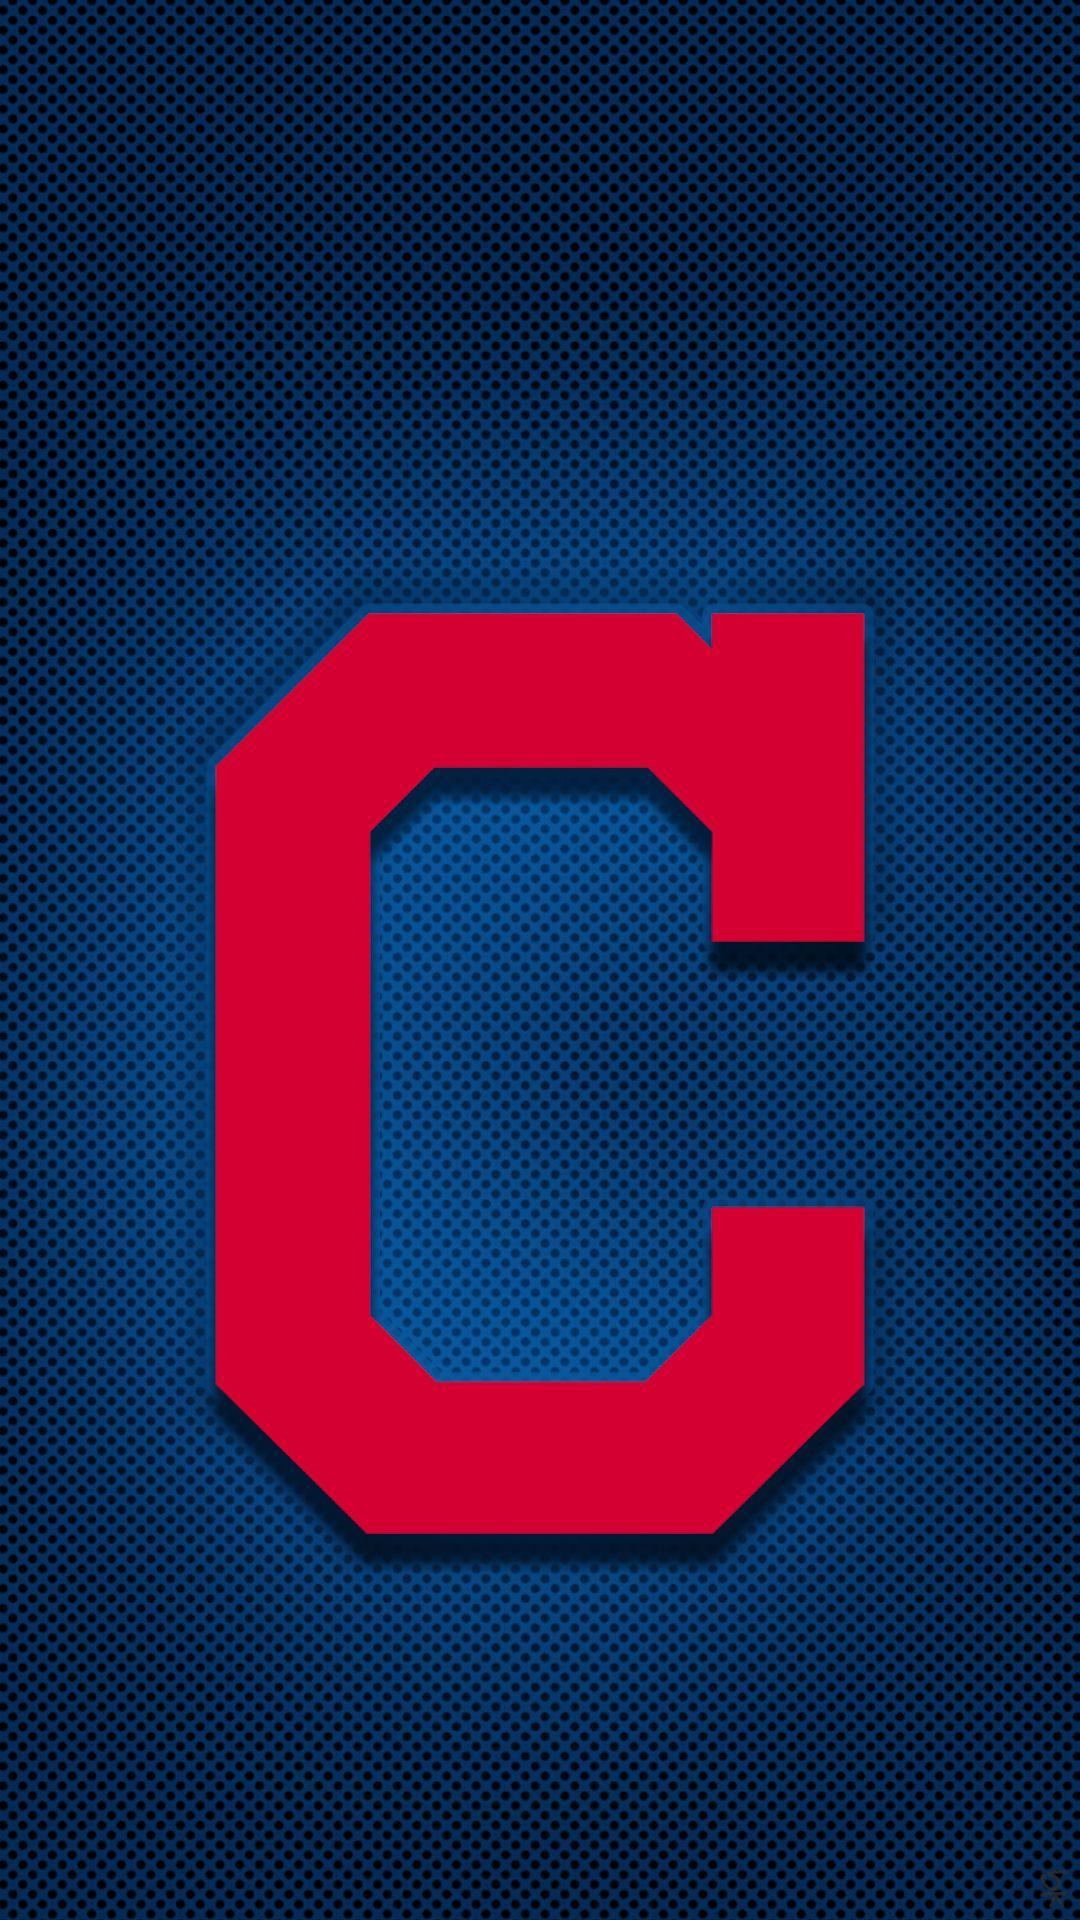 Cleveland Indians 2017 Wallpapers - Wallpaper Cave